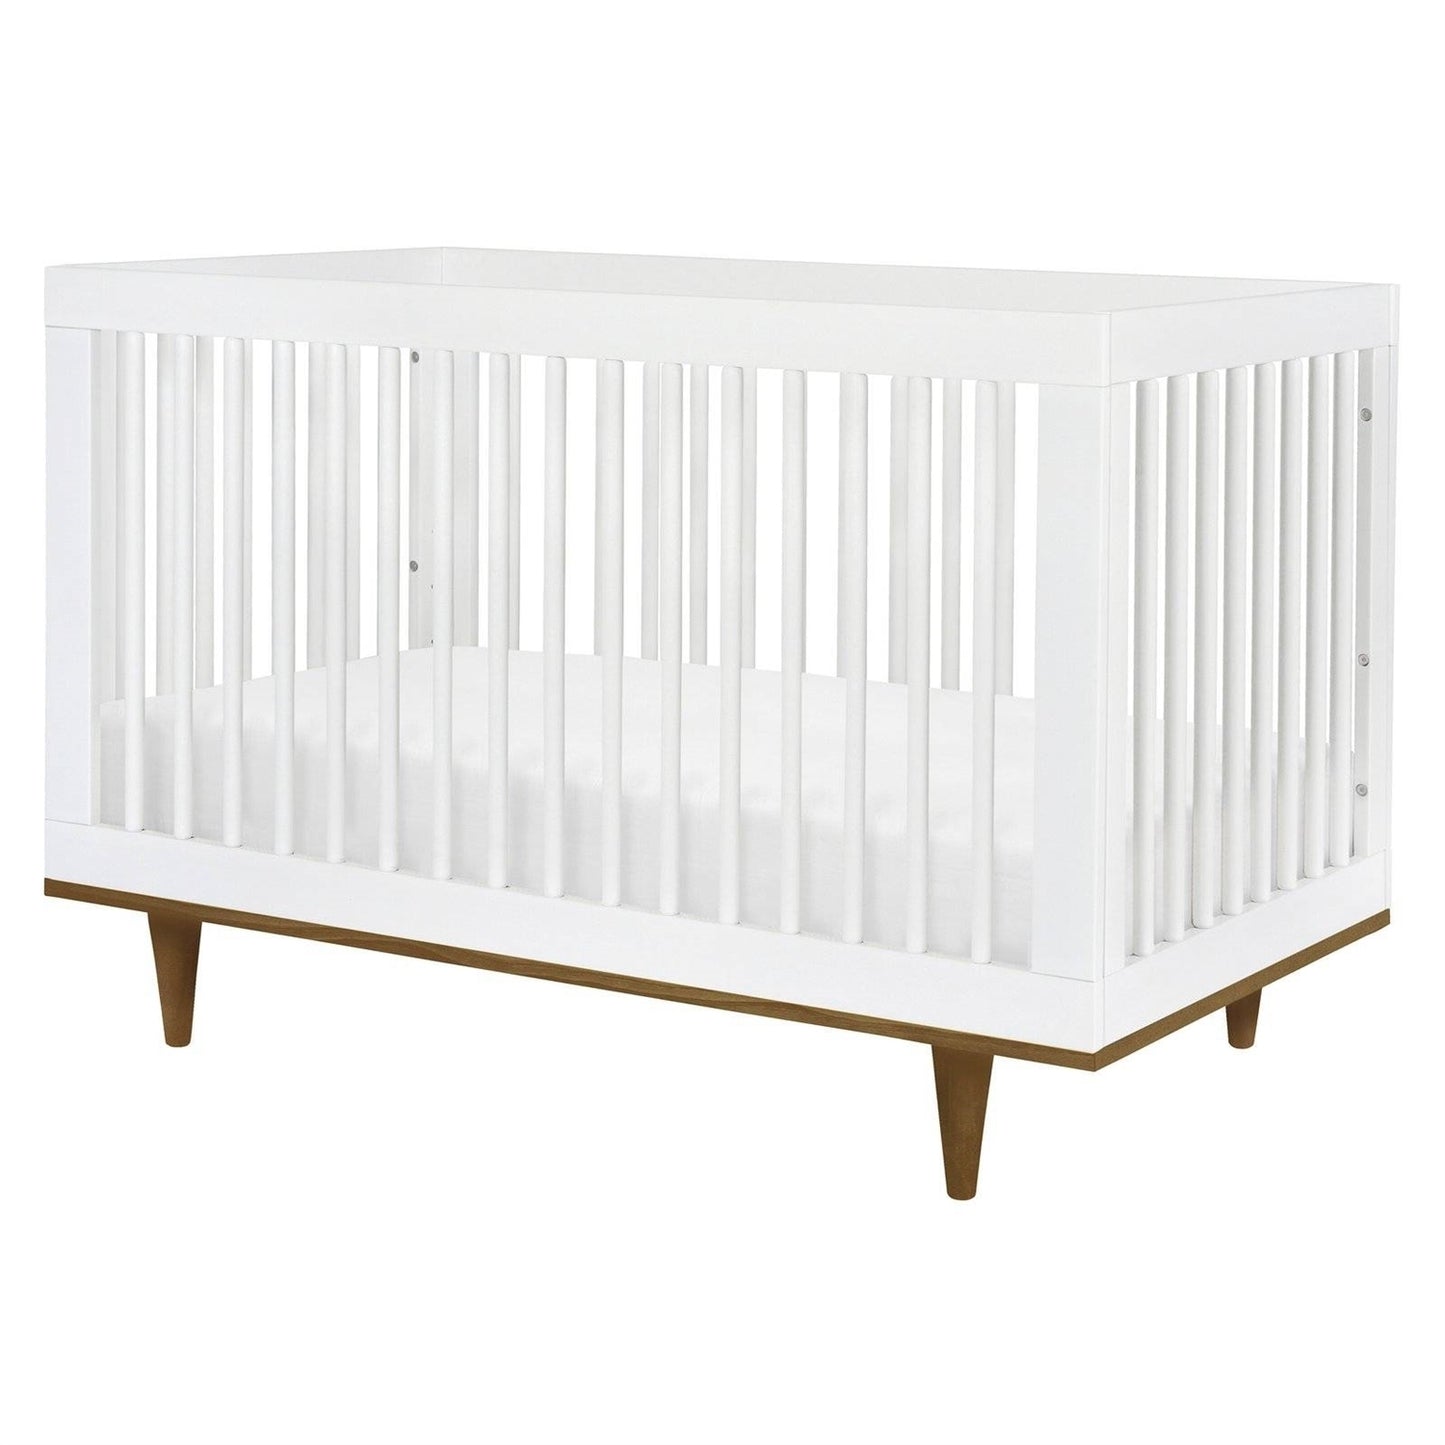 3-in-1 Modern Solid Wood Crib in White with Mid Century Style Legs in Walnut